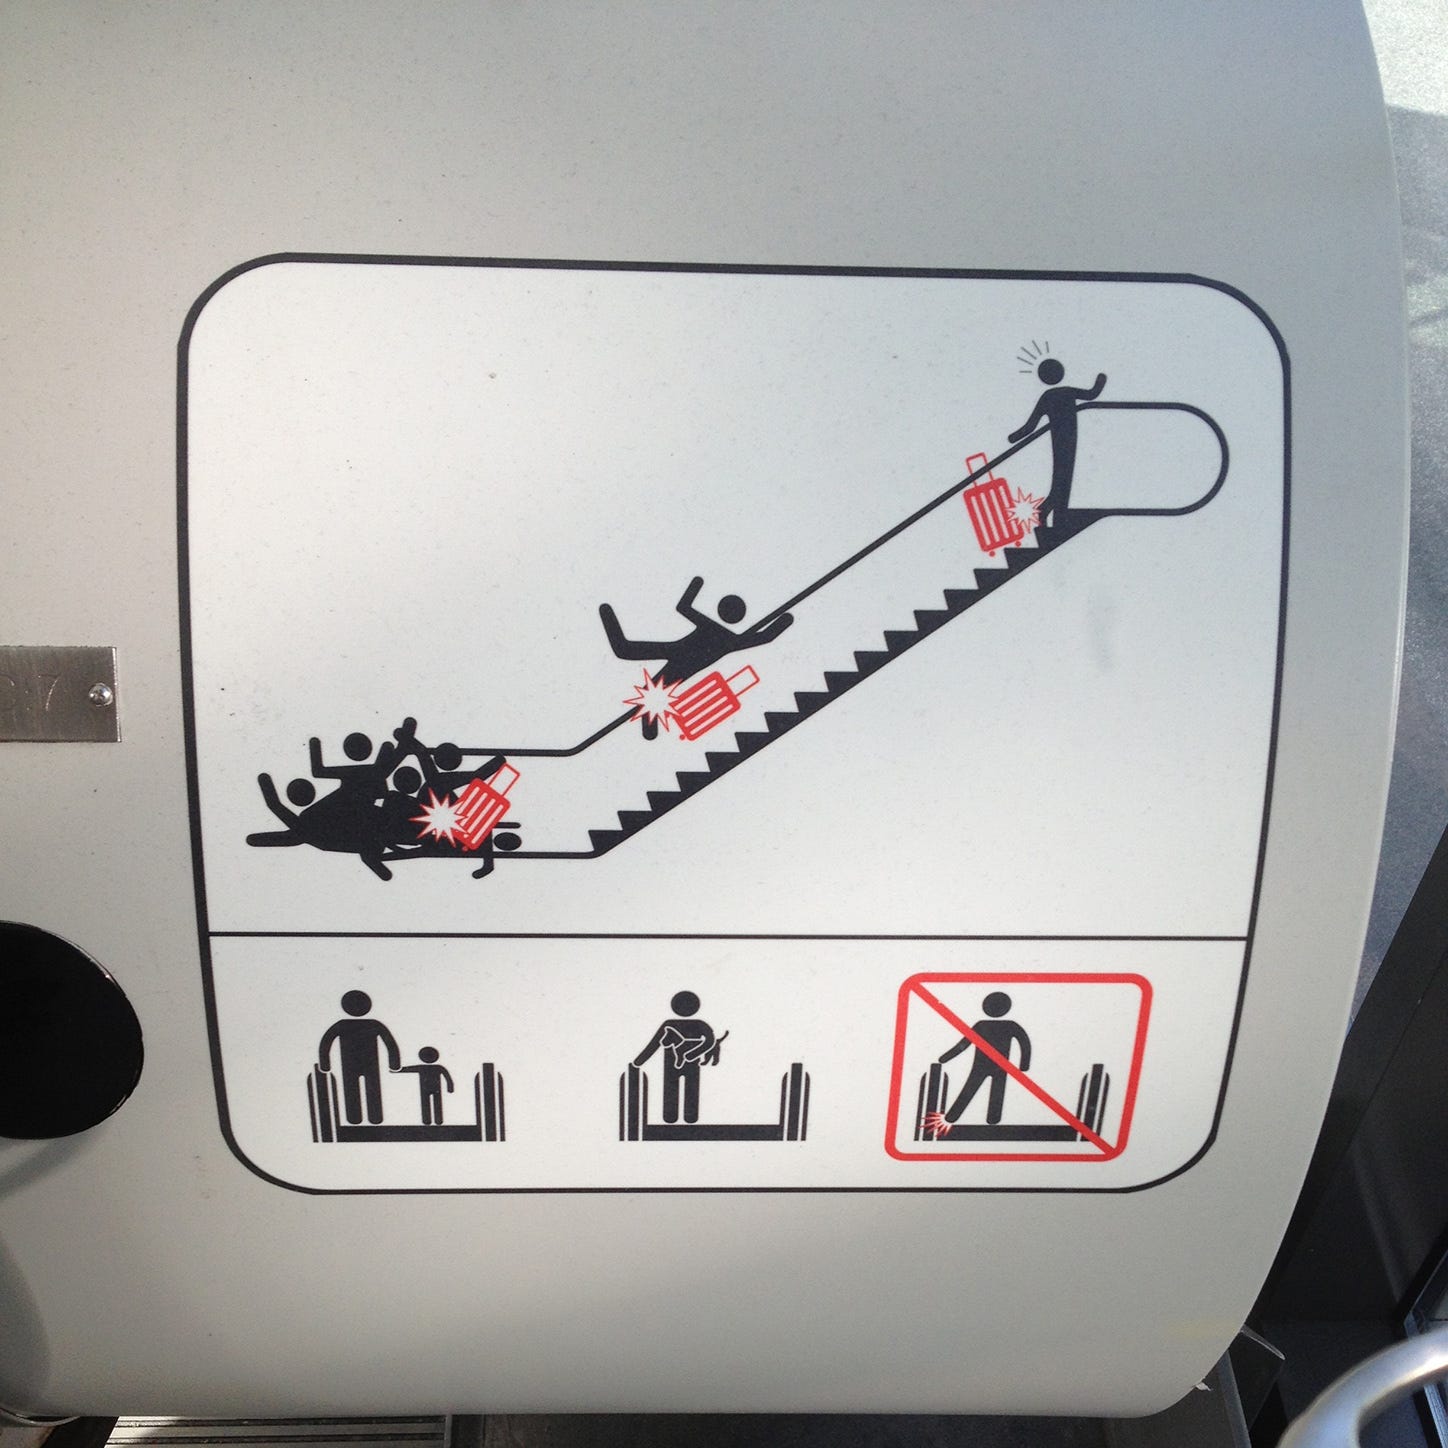 An escalator safety infographic showing several people tumbling down it with their luggage